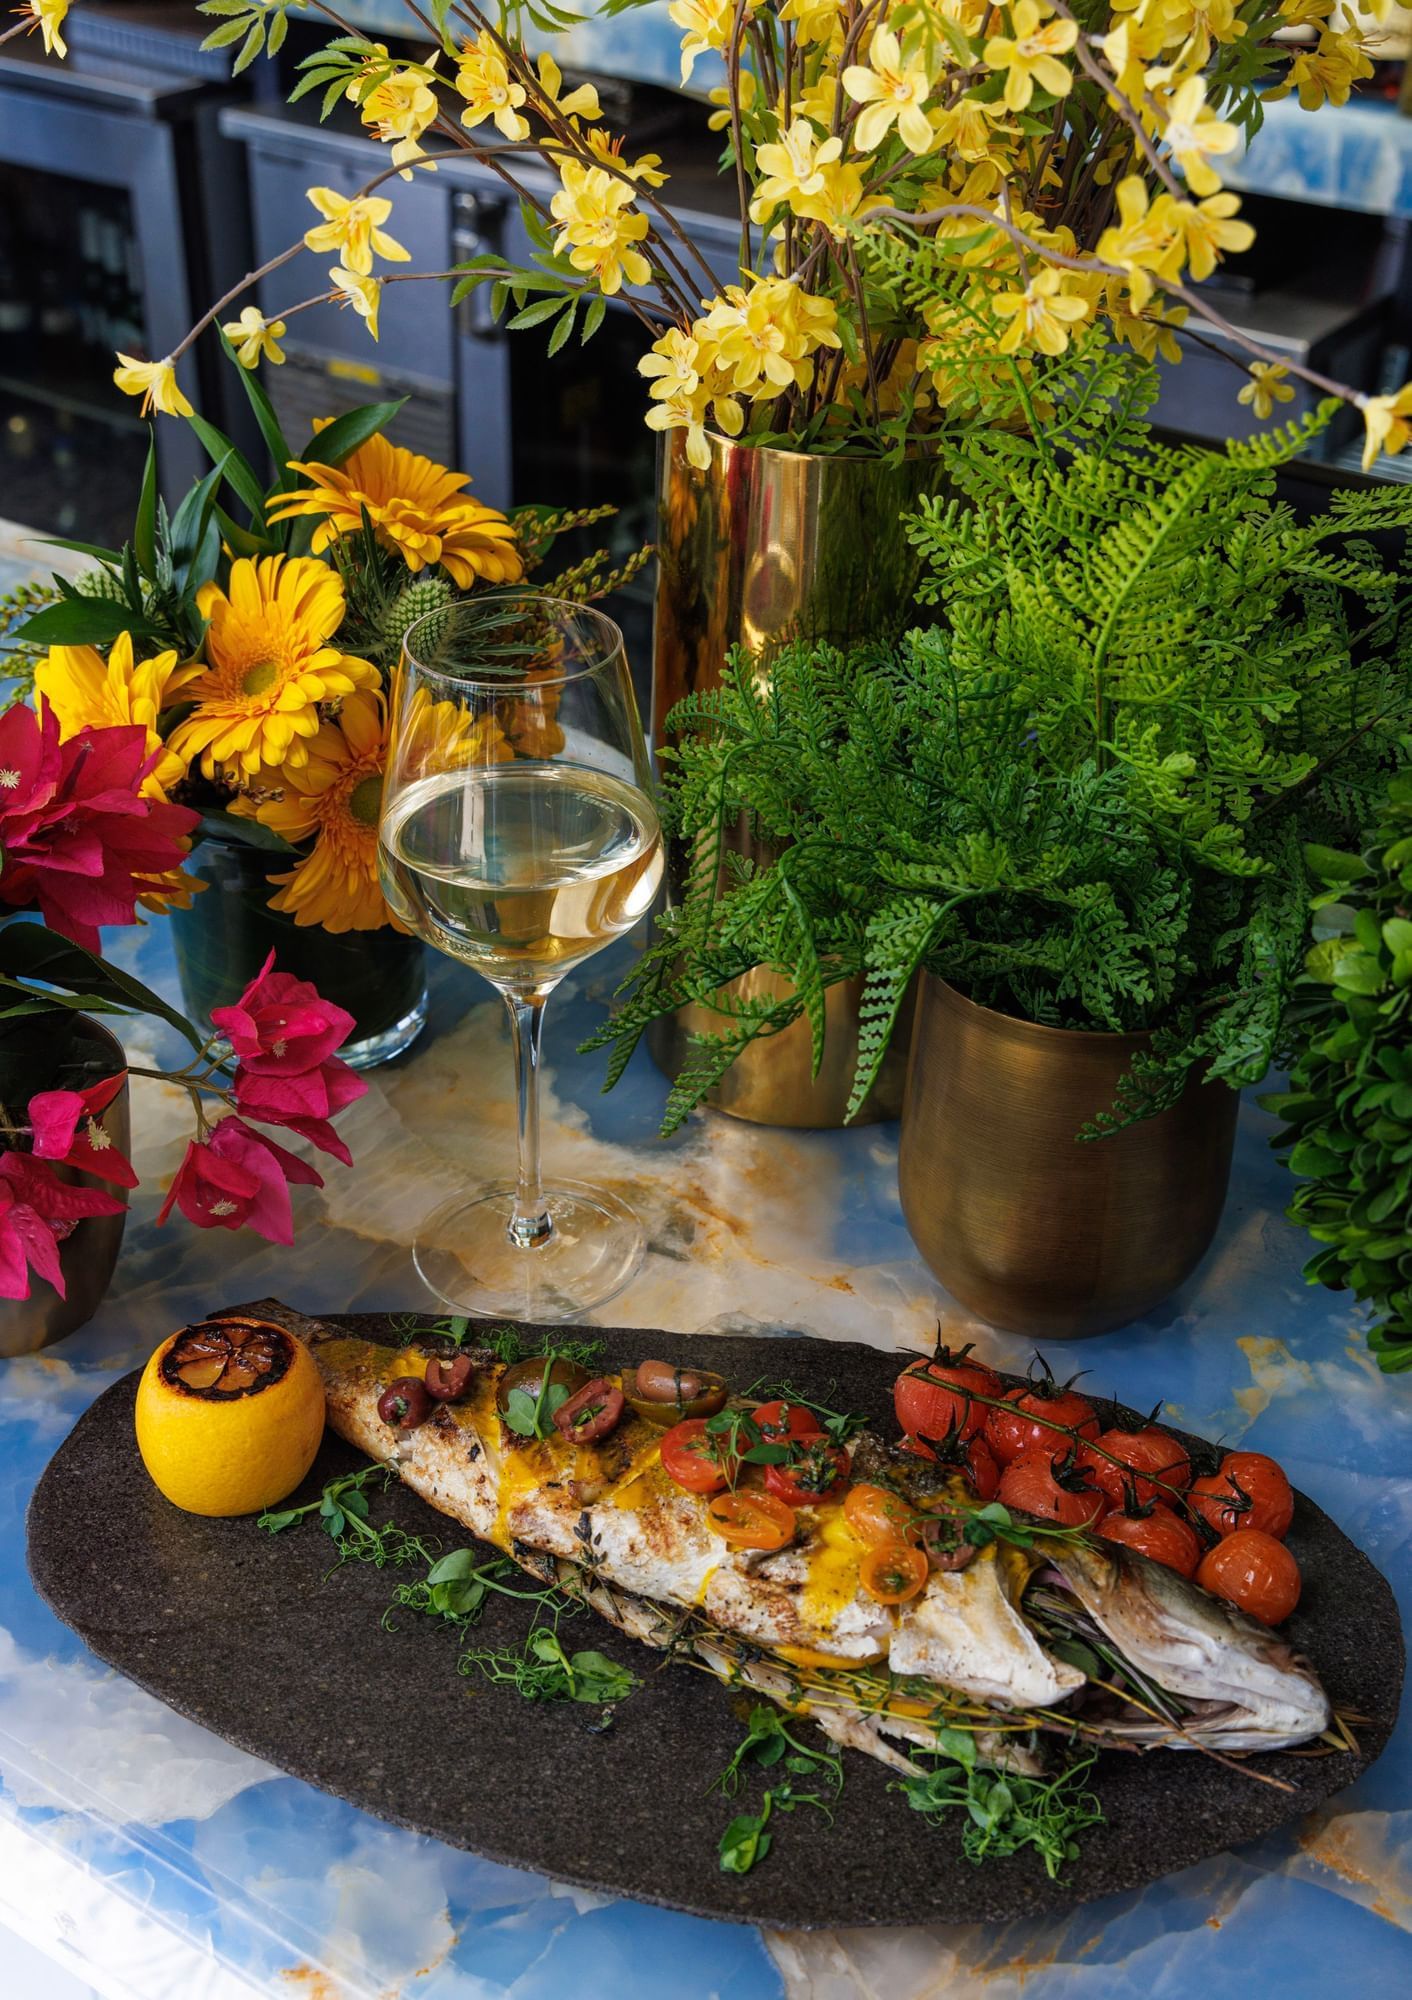 A branzino fish fillet with thyme and lemon and a glass of white wine surrounded by florals